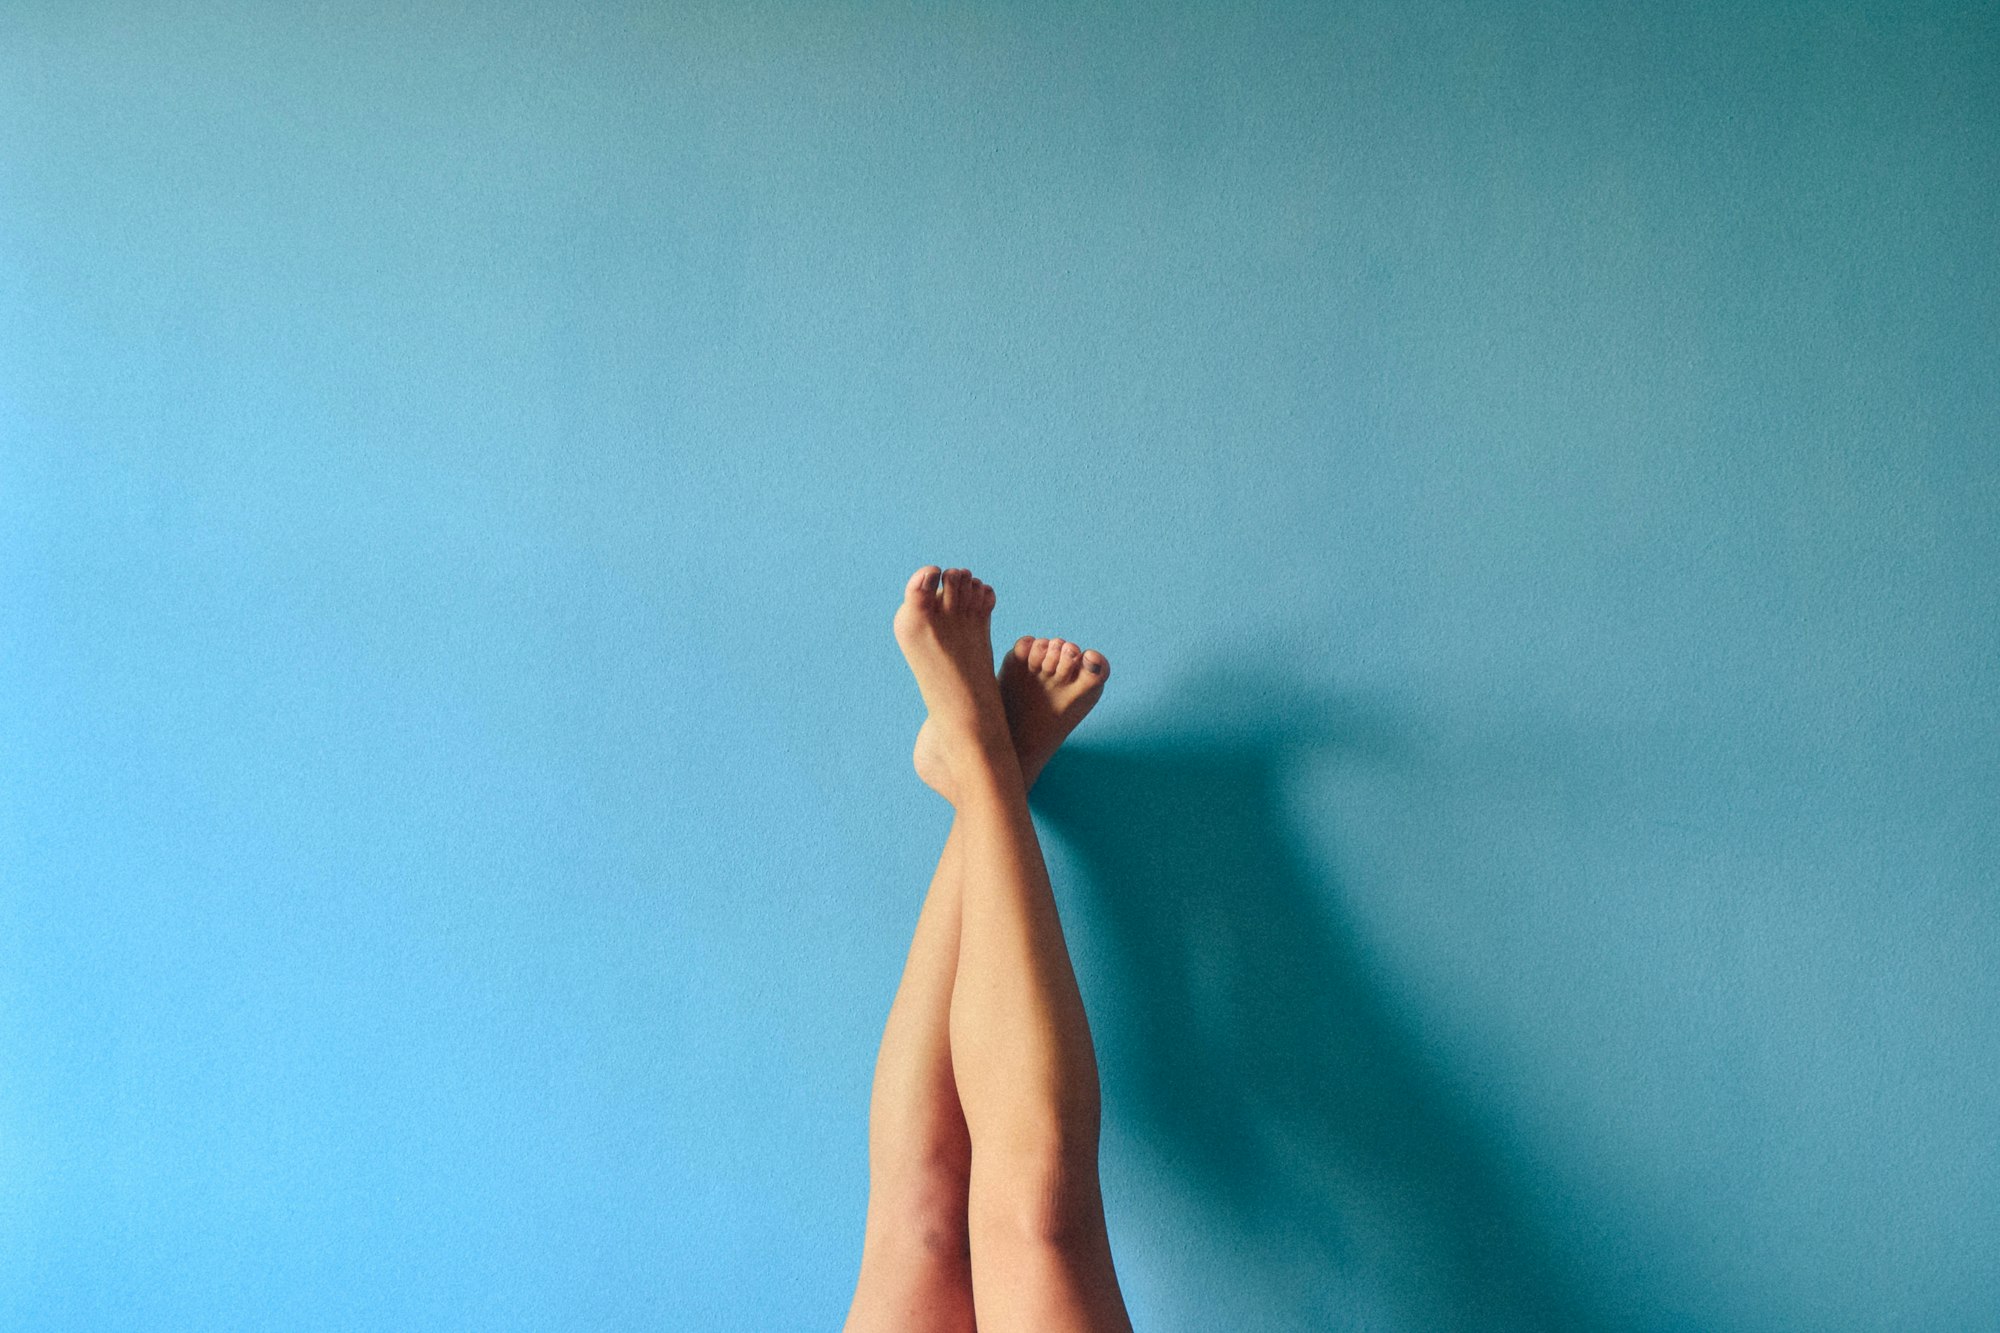 Women with legs up representing a doctors visit when getting a papsmear.